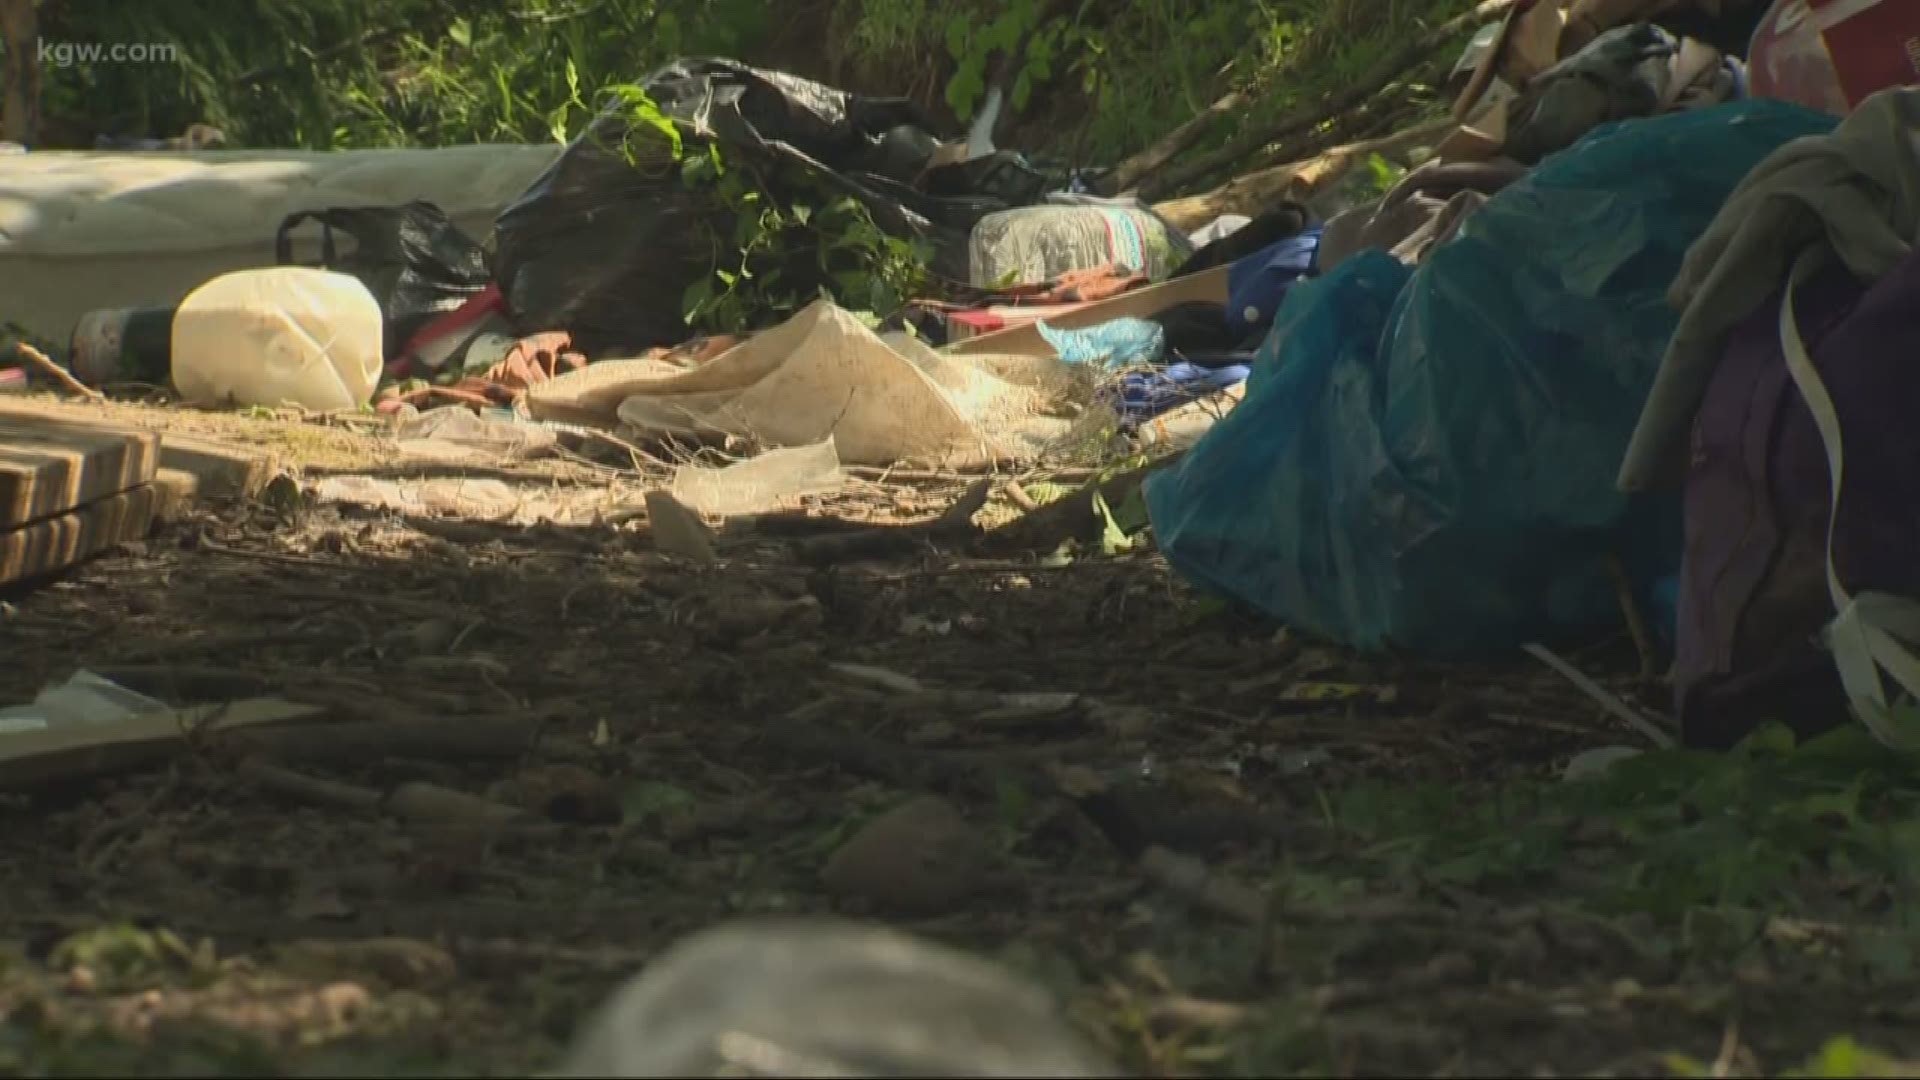 Mayor Ted Wheeler said on Friday that homeless sweeps would continue in Portland. The executive director of Street Roots says it's absurd.